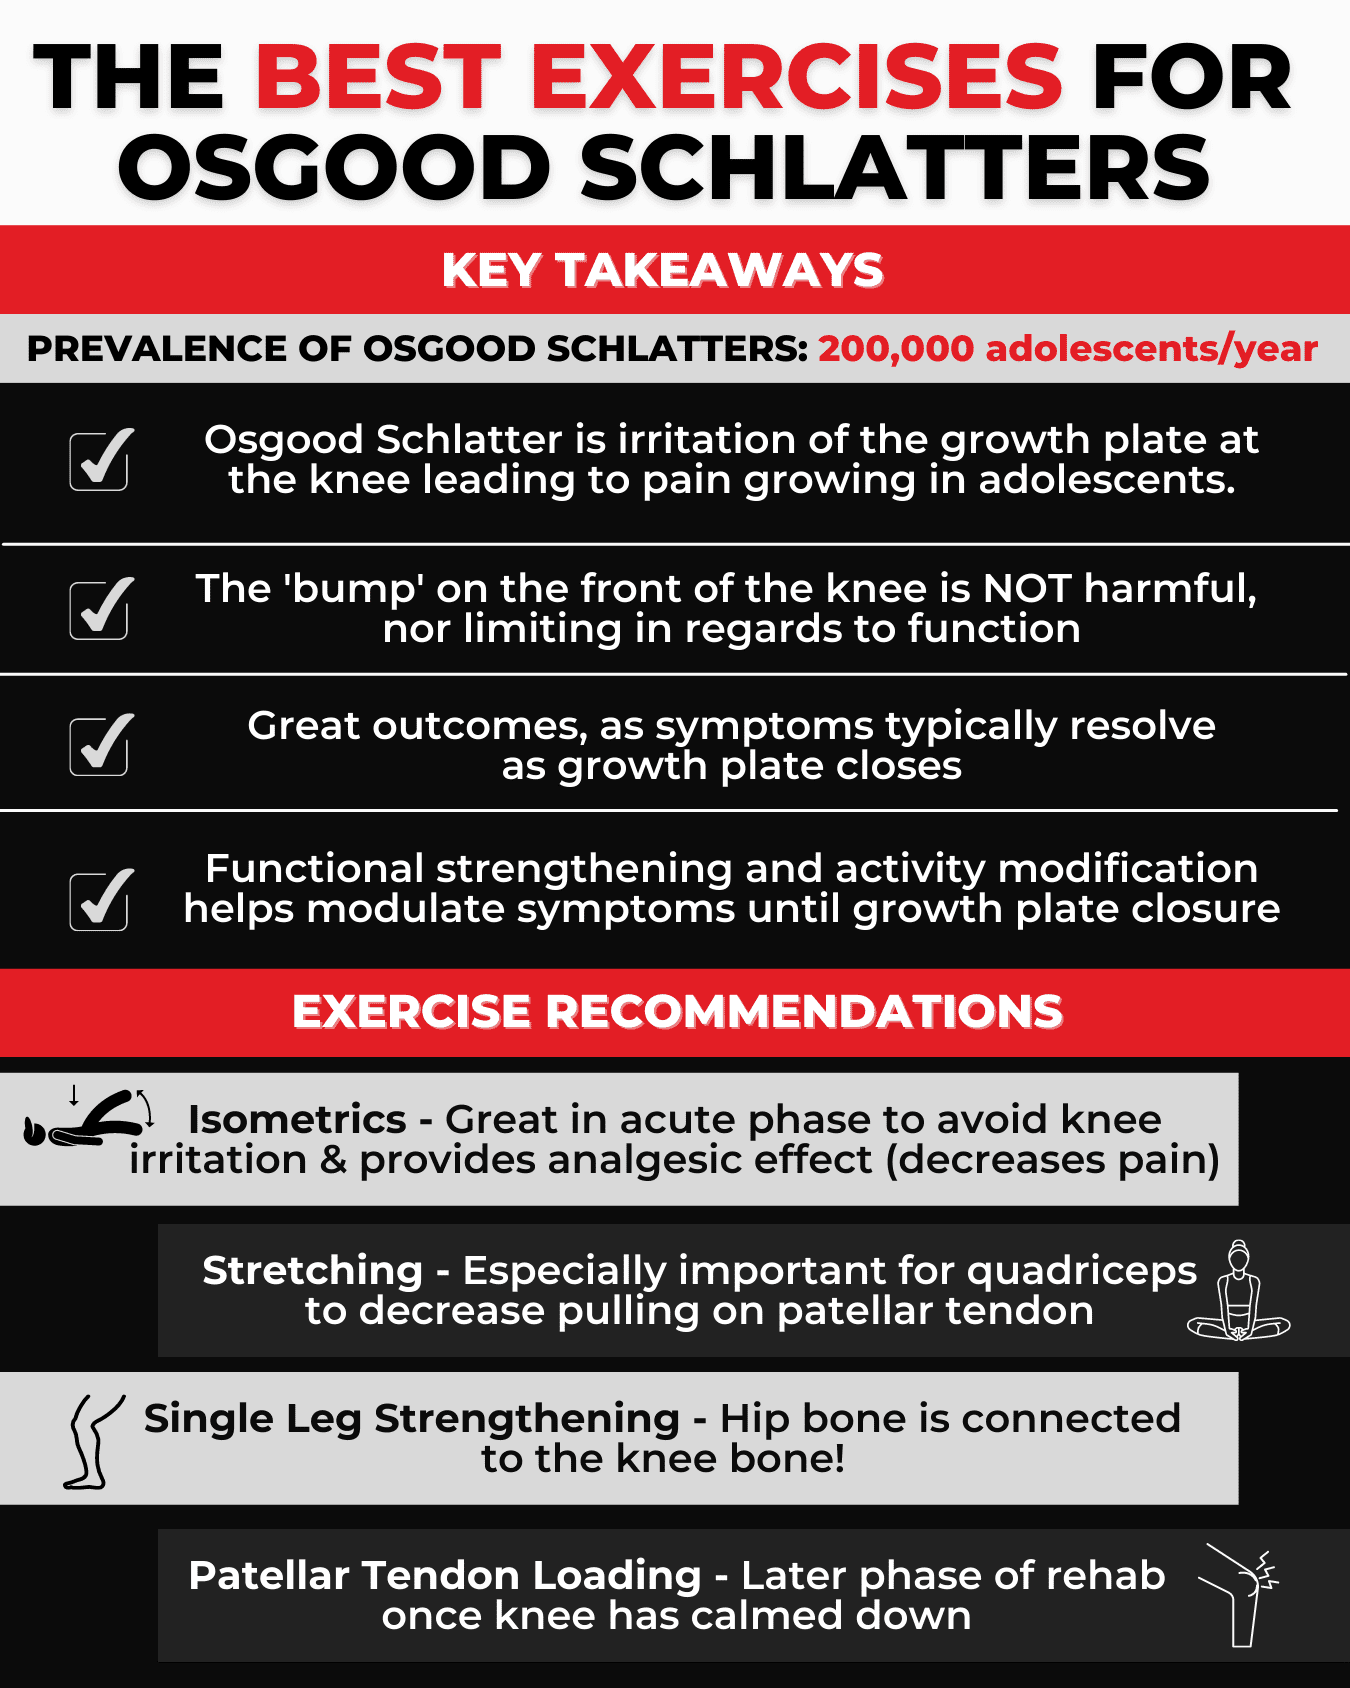 Osgood Schlatter Disease in Adults: Treatment for Knee Pain